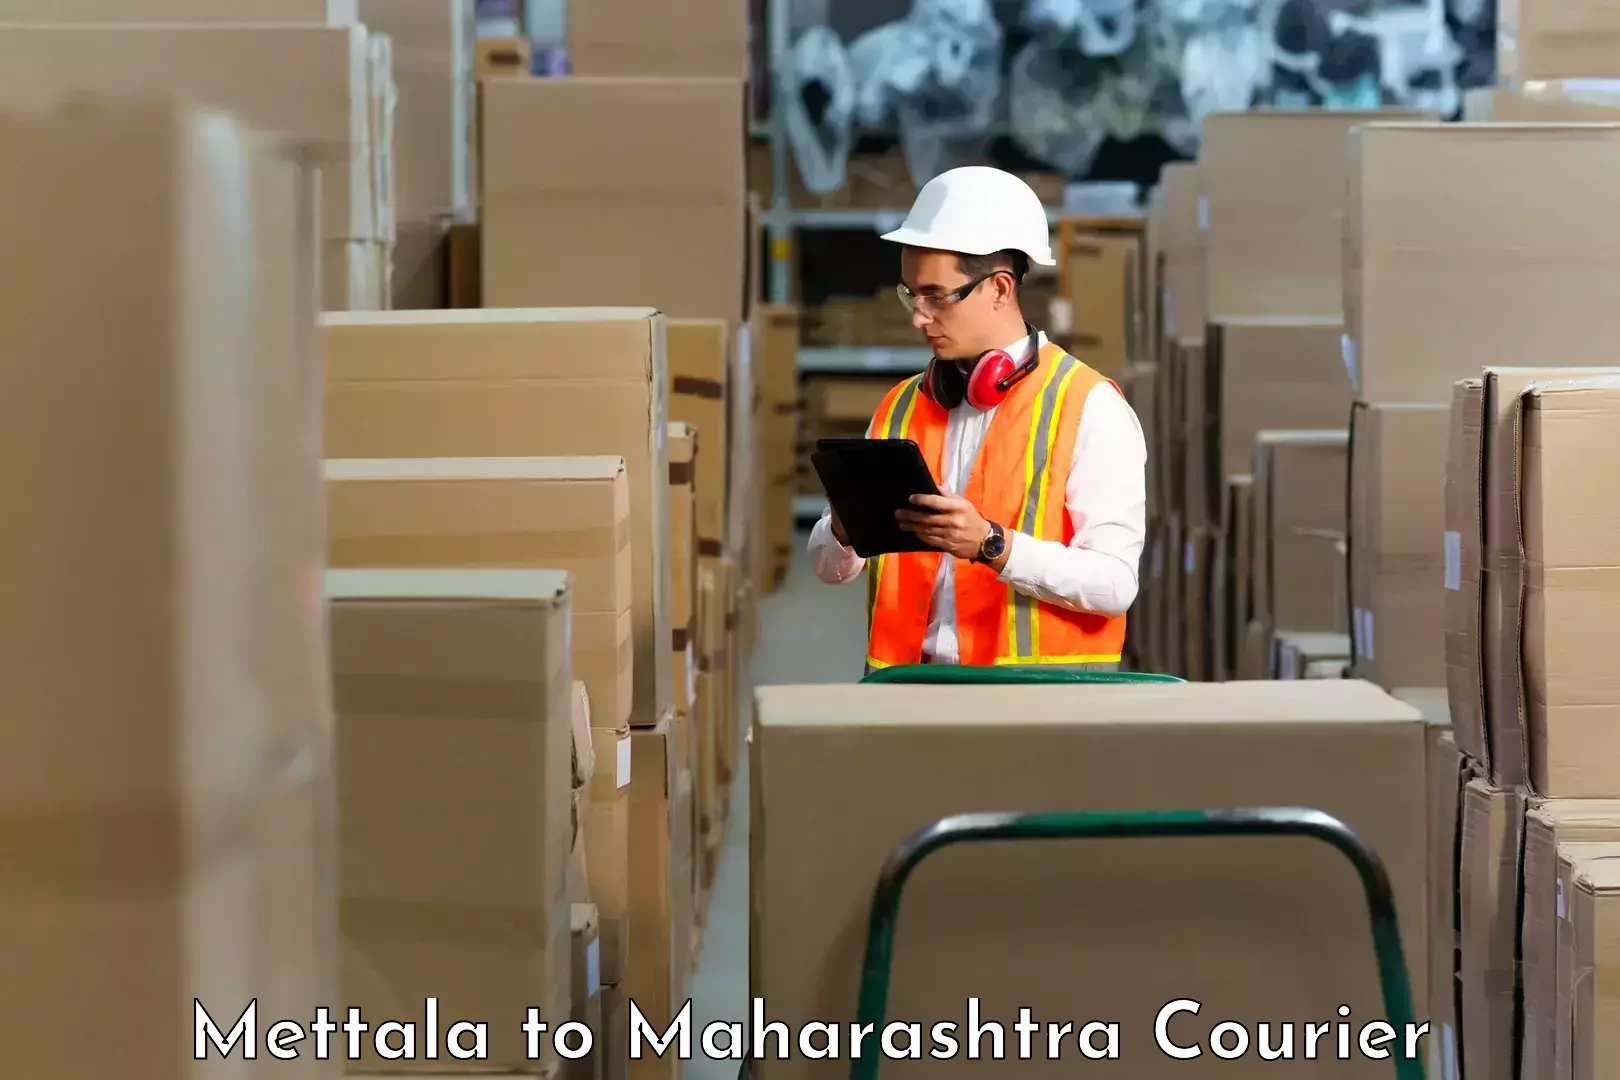 Package delivery network Mettala to Koregaon